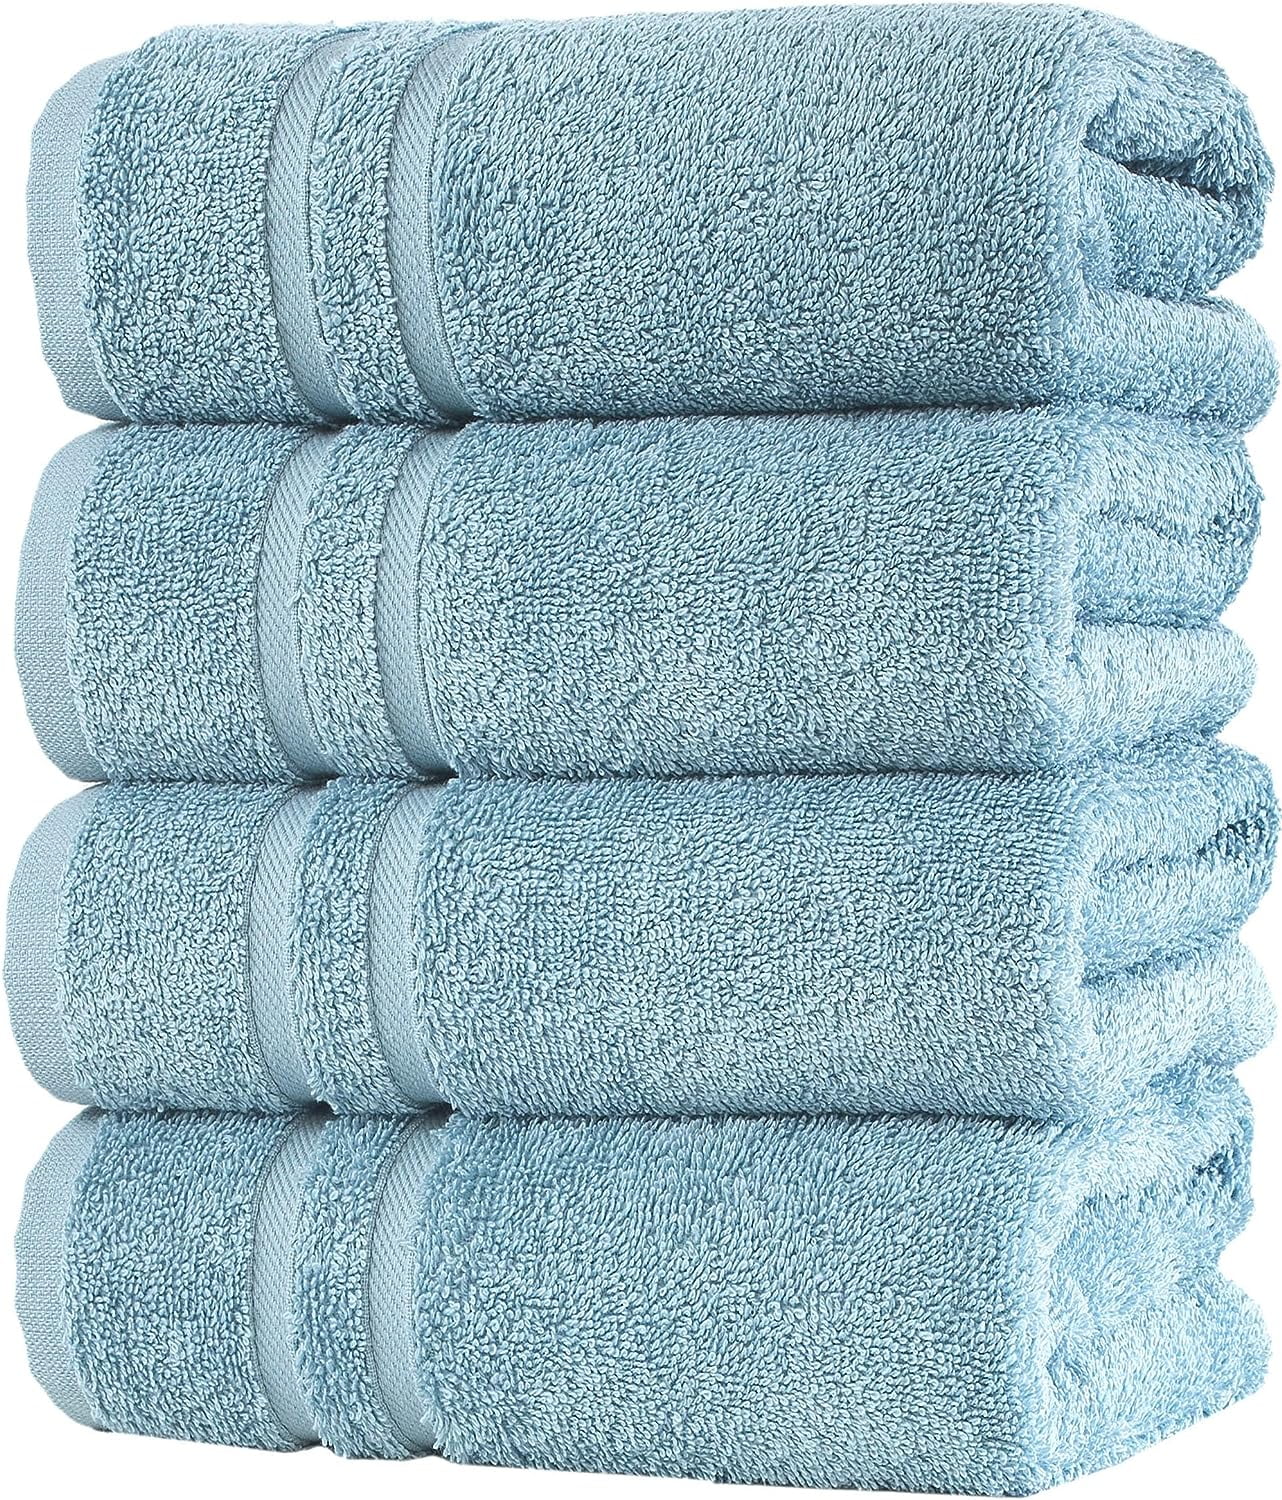 Towel and Linen Mart 4 Pieces Bath Towel Sets - Electric Blue - 2 ply Low  Twist Soft Feel Luxurious,Quick Dry, Extra Absorbent, 100% Ring Spun Cotton